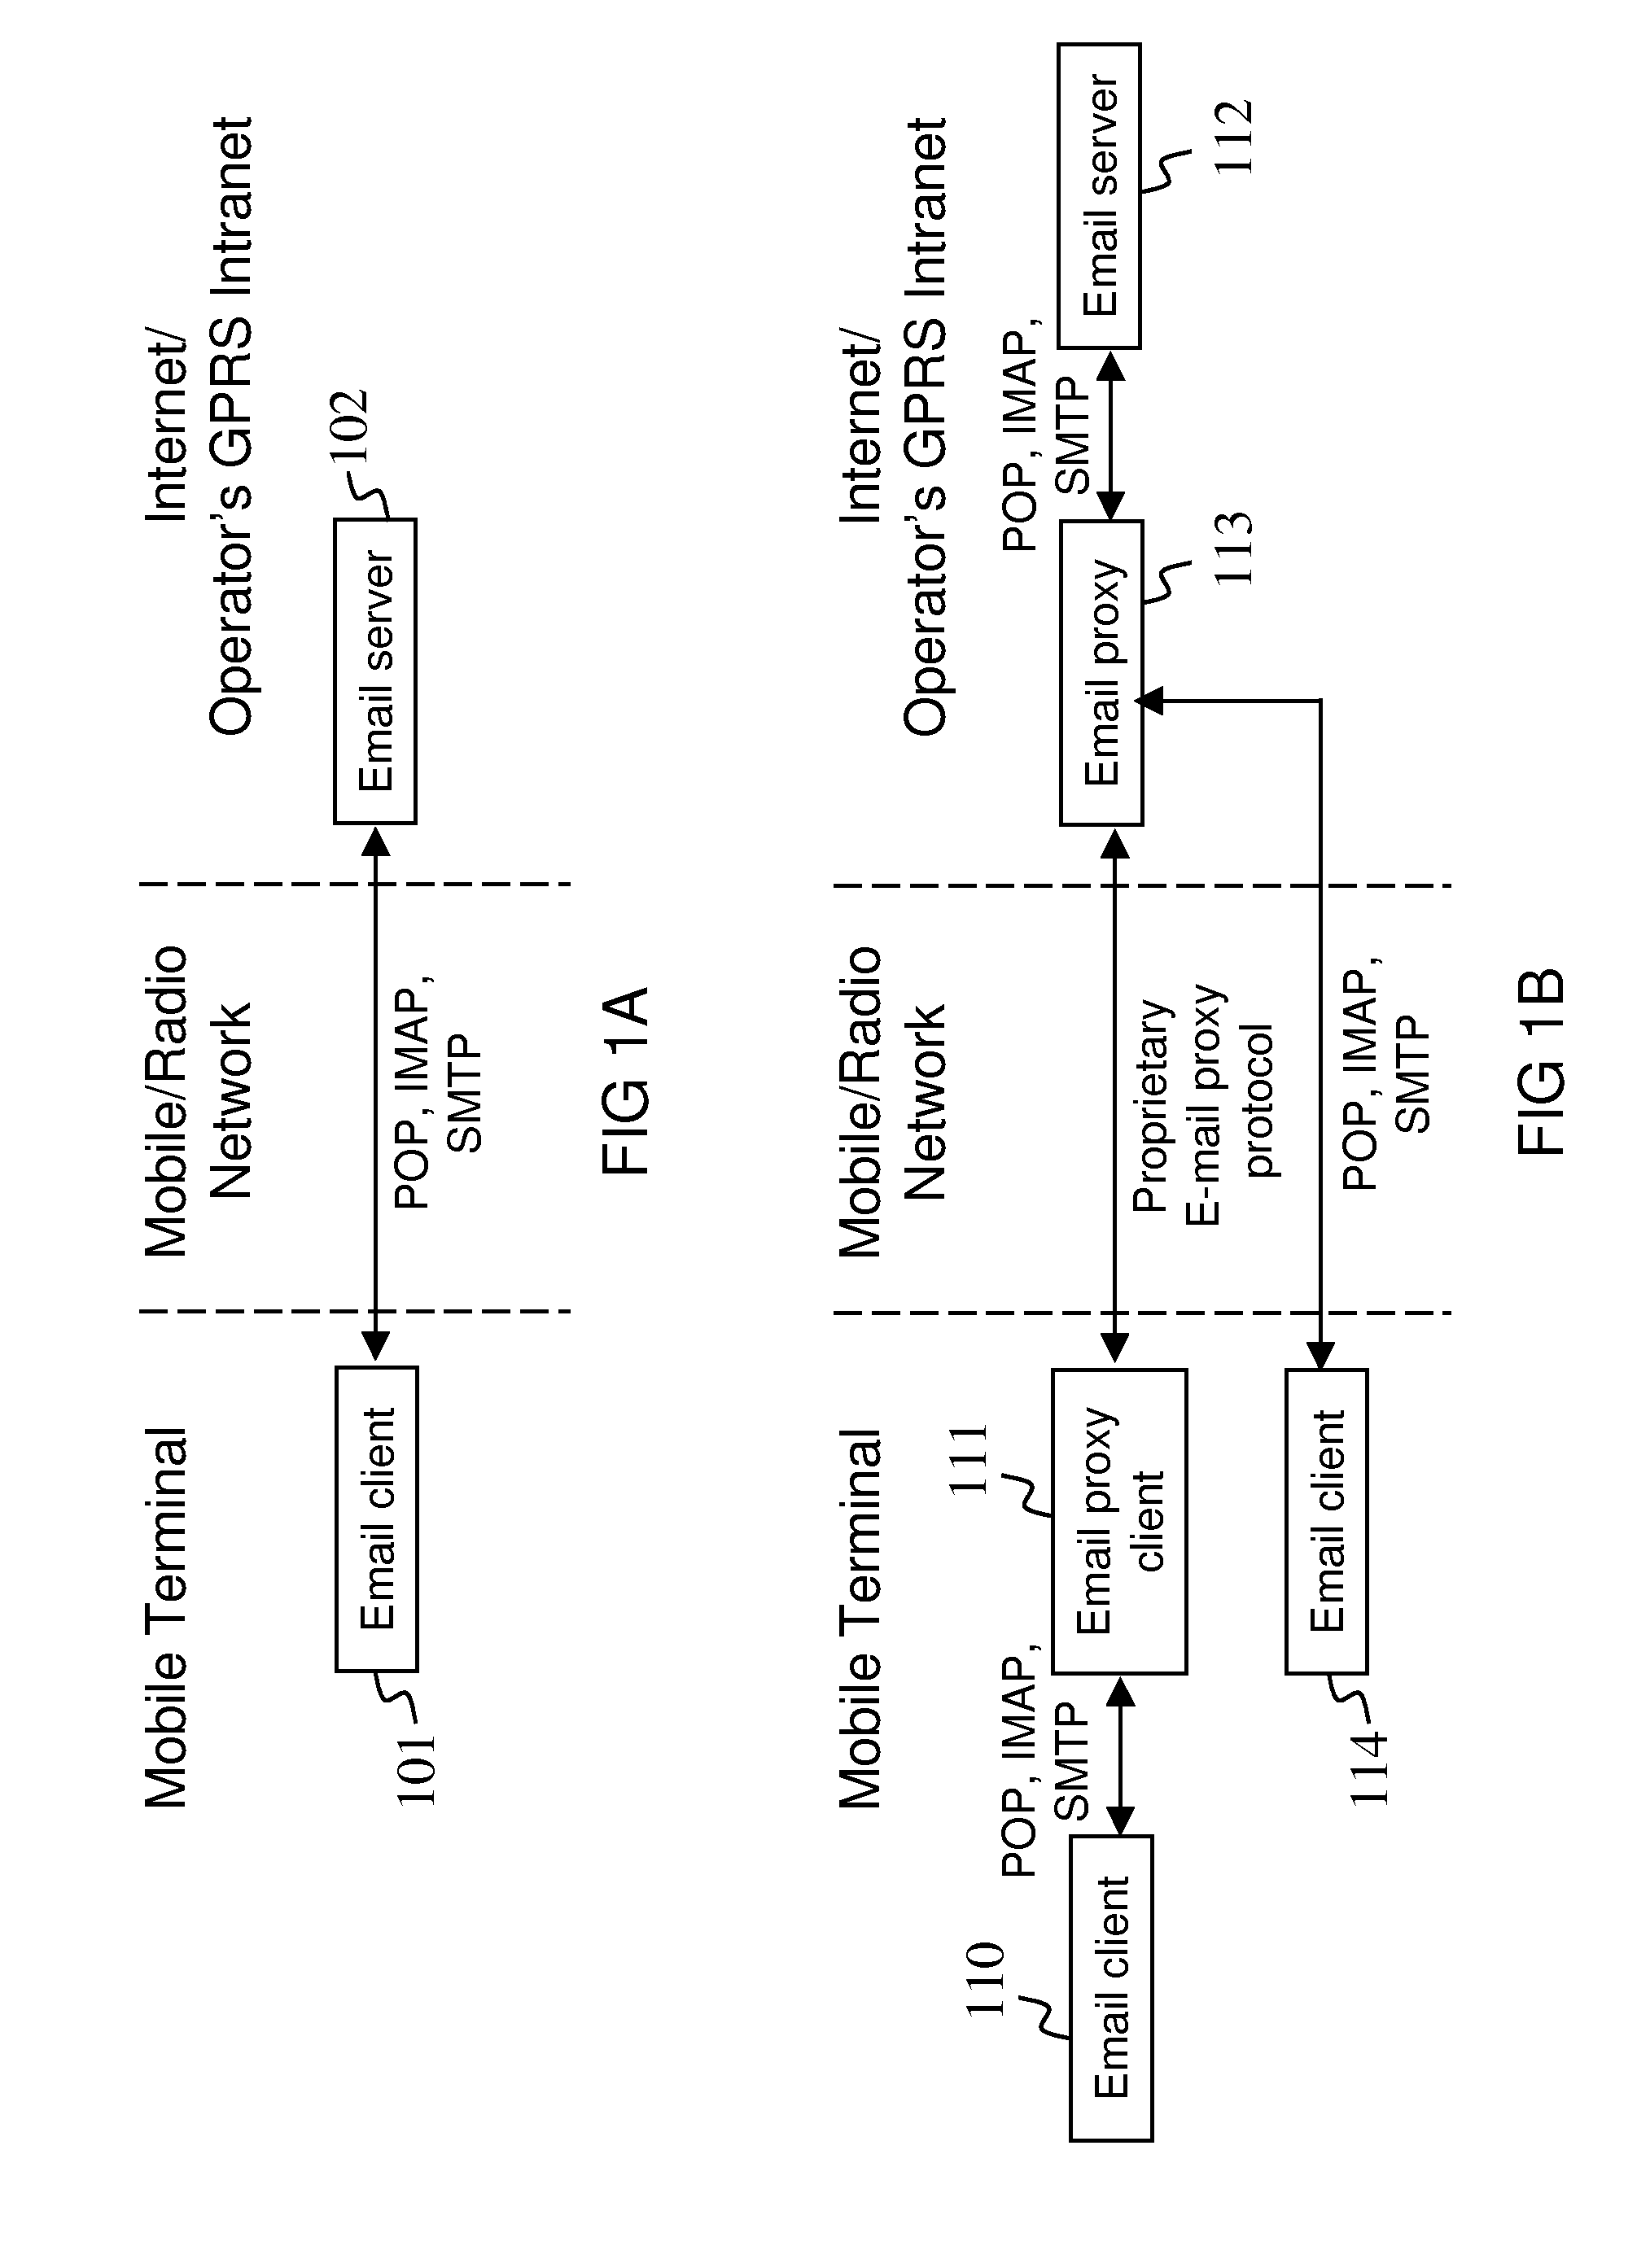 Processing of Messages to be Transmitted Over Communication Networks